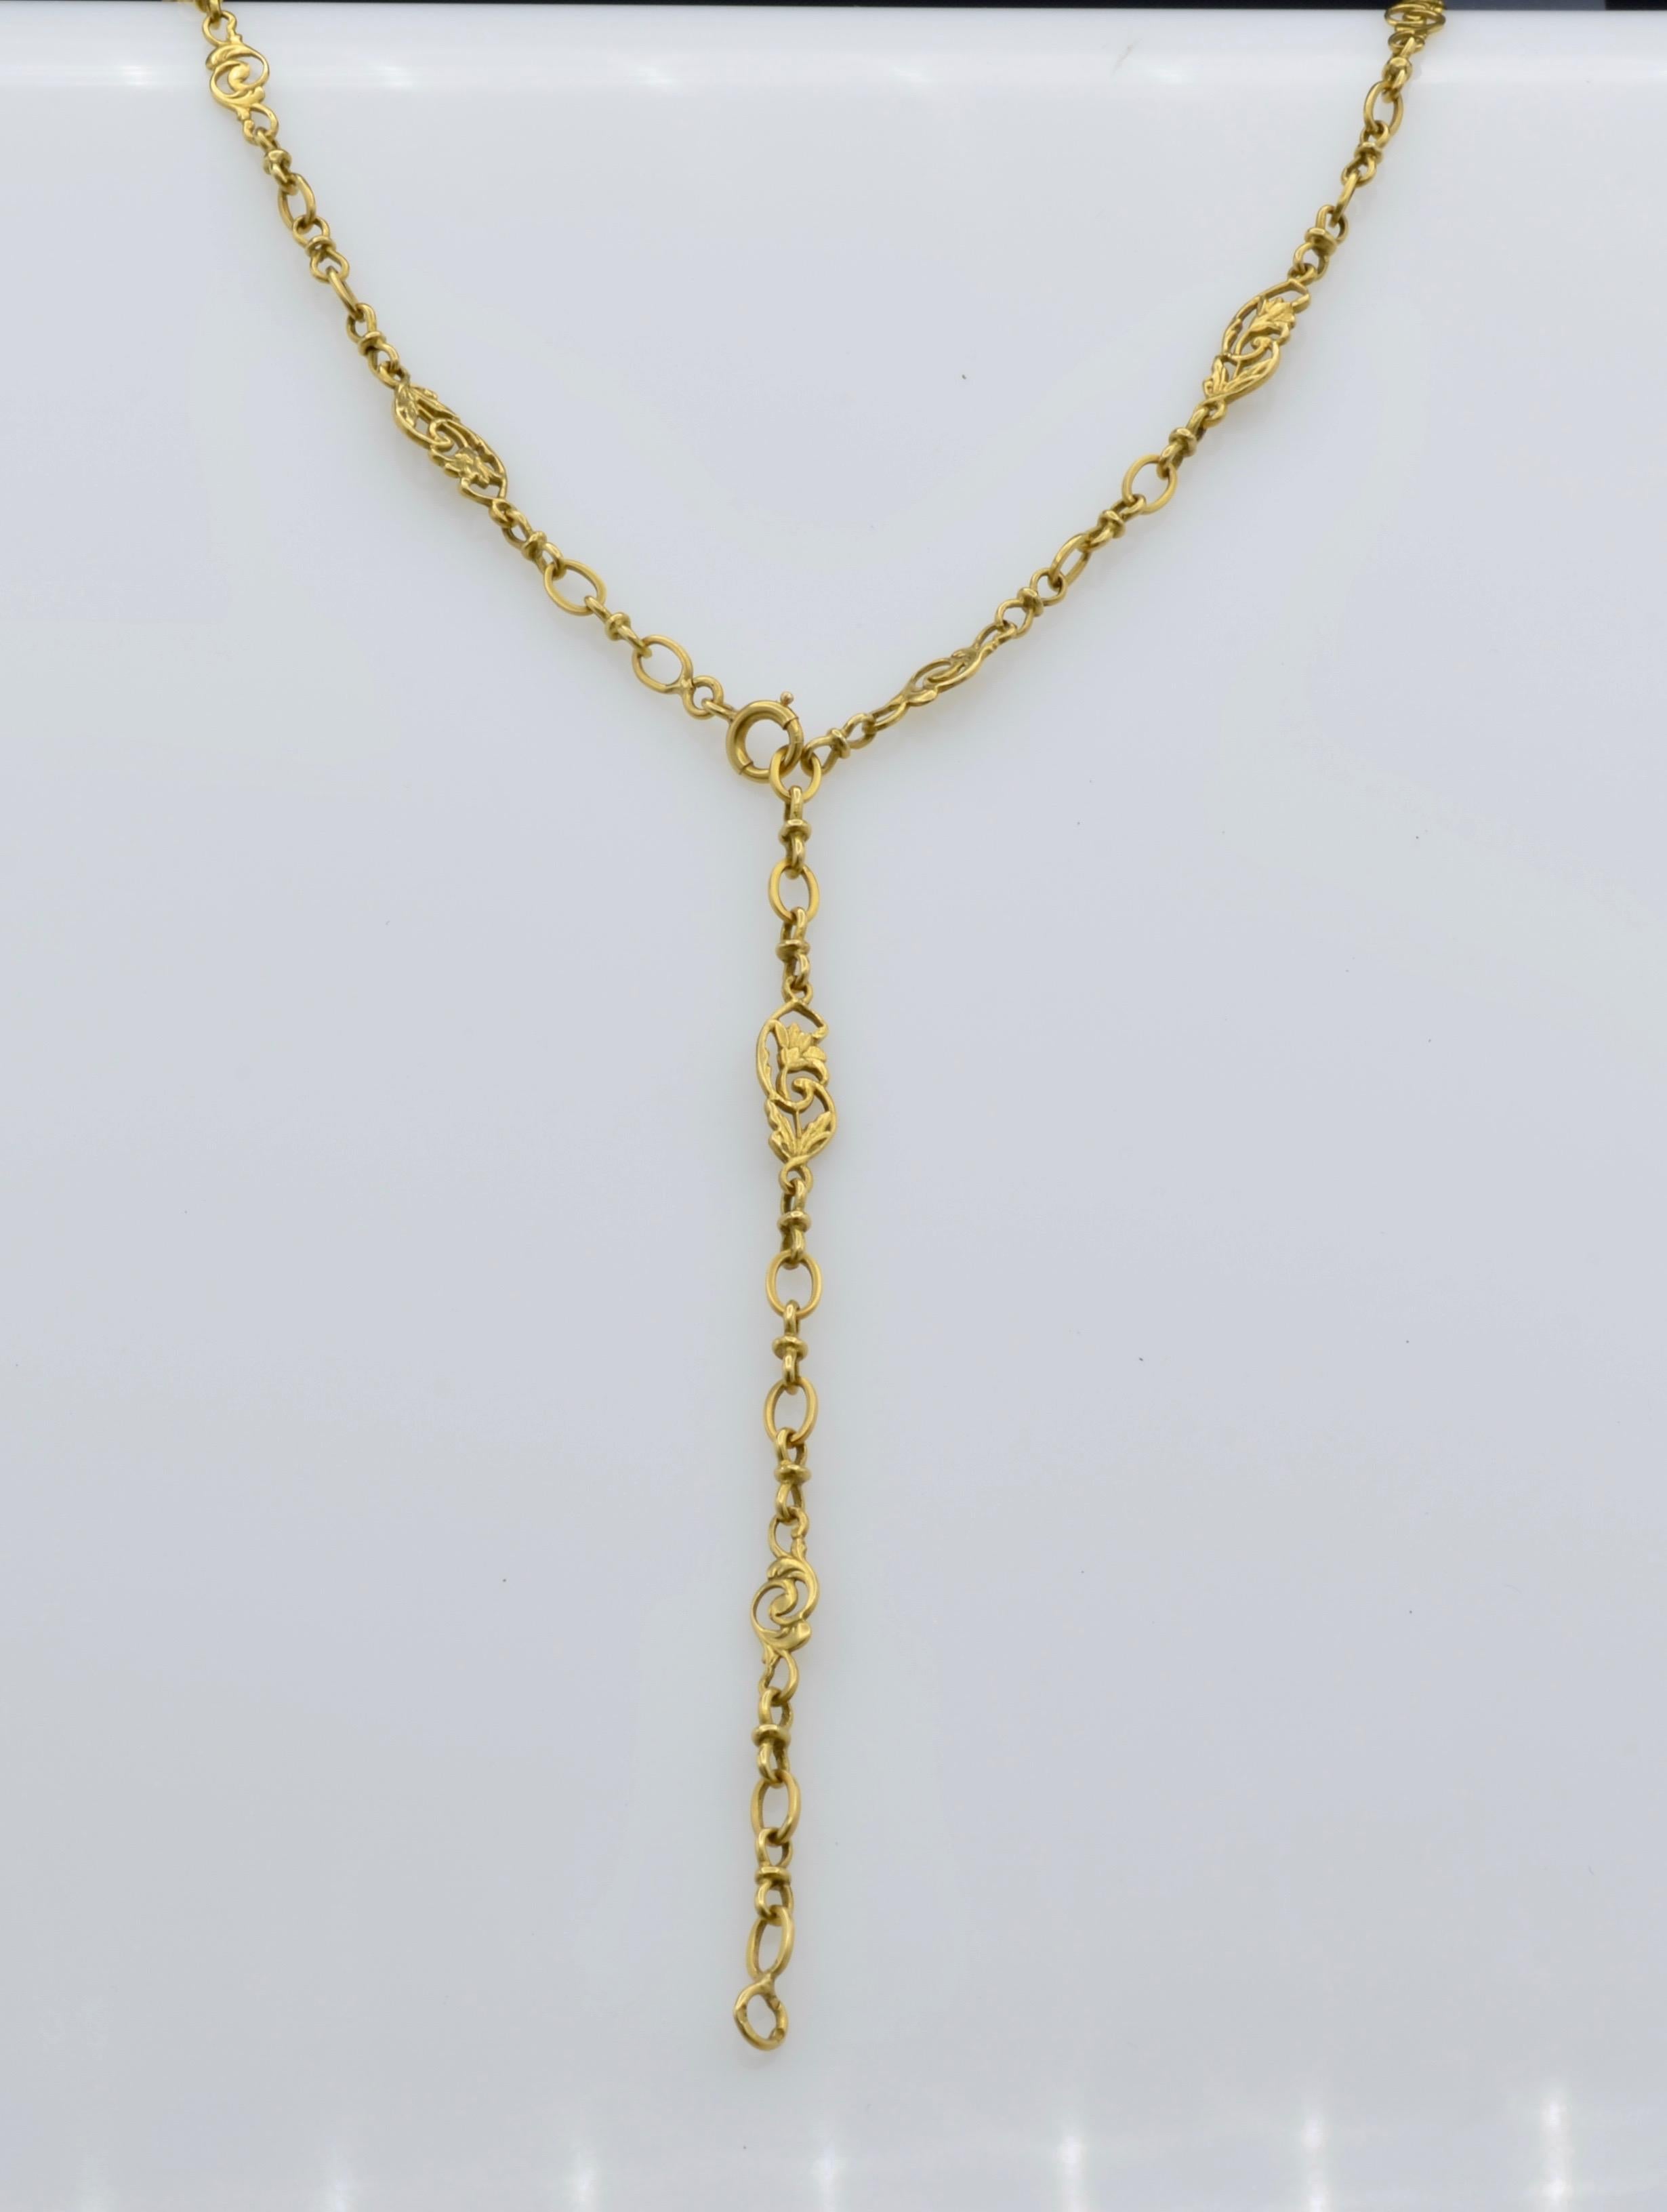 French Antique Sautoir Yellow Gold Chain Link Necklace with Lillies and Vines 2